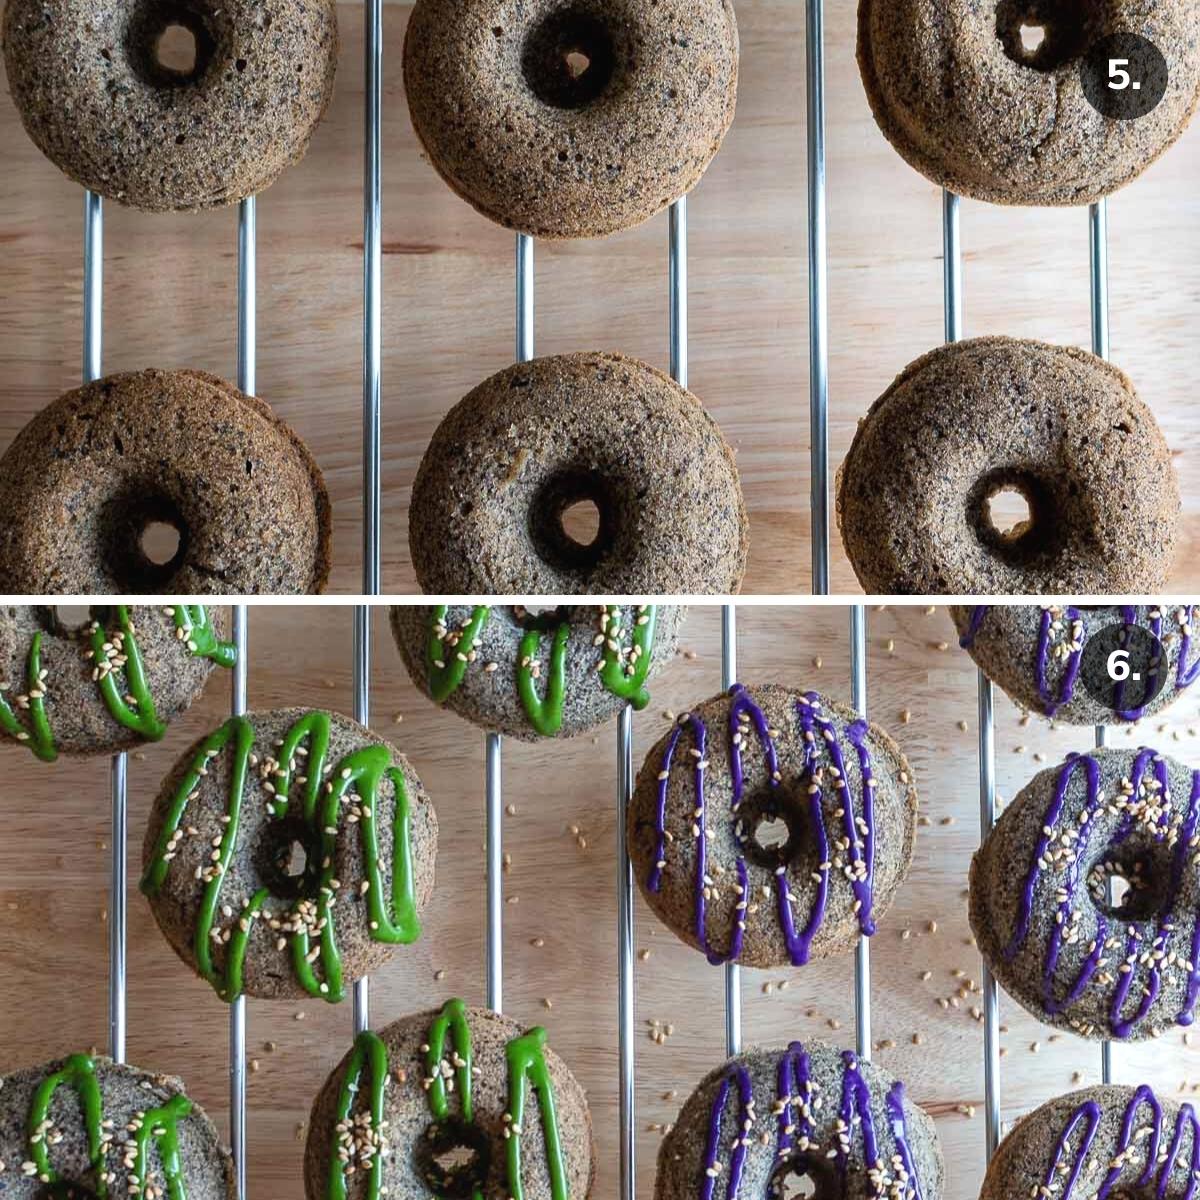 Baked donuts cooling on a wire rack plain and glazed matcha and ube glazed donuts.